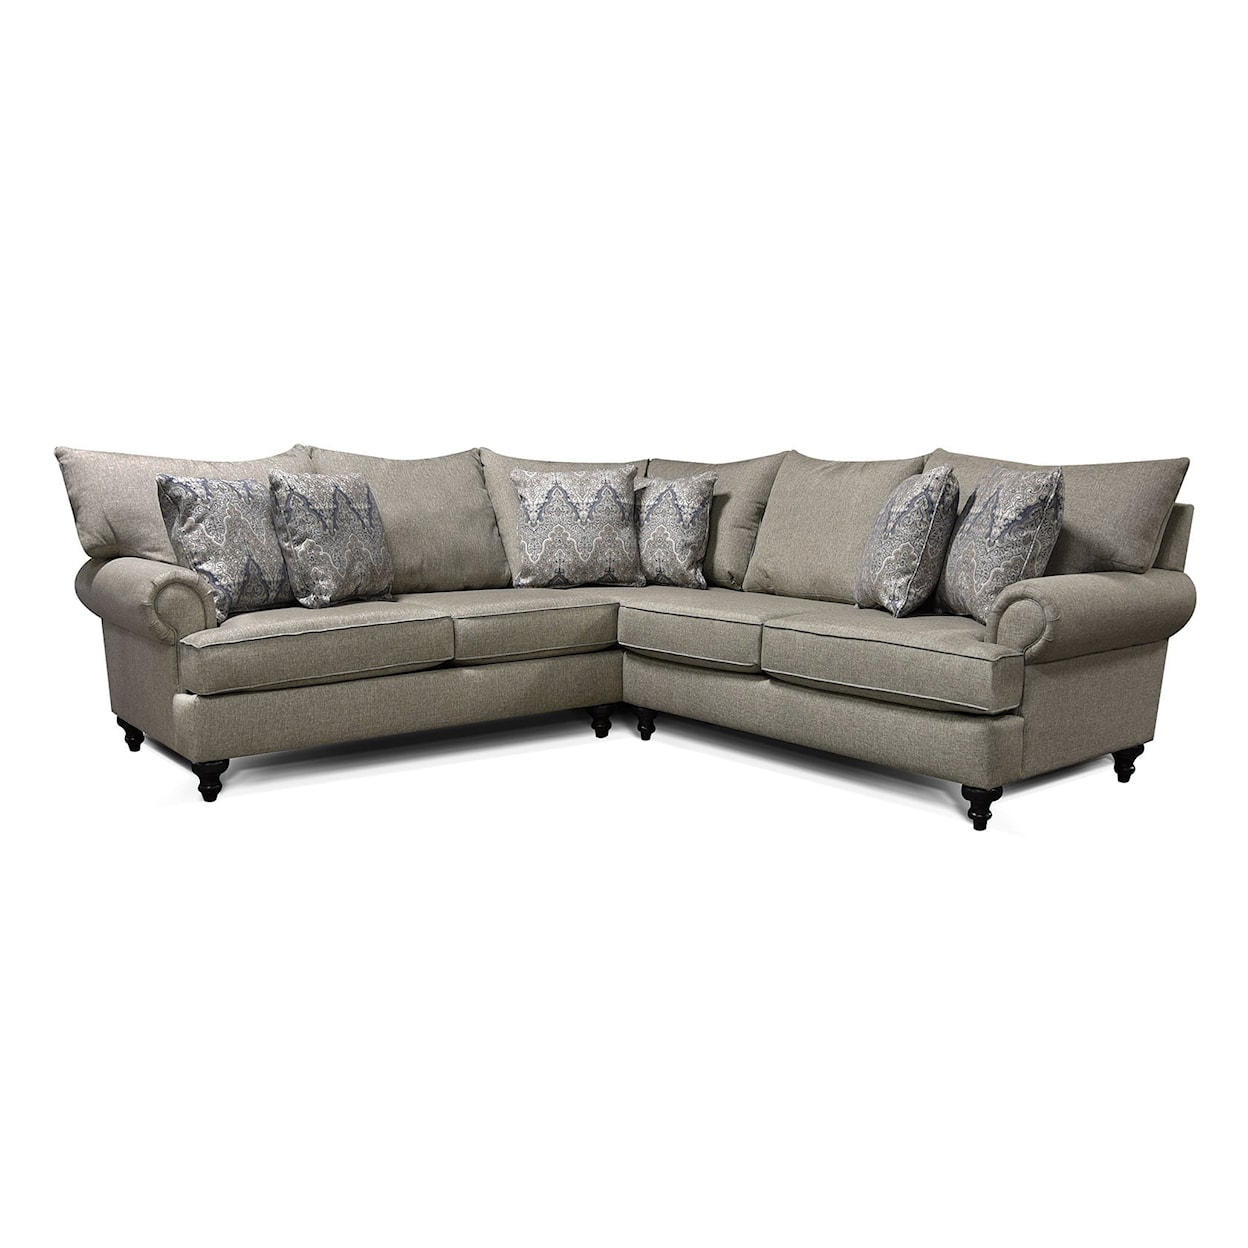 England 4Y00/N Series 2-Piece Sectional Sofa